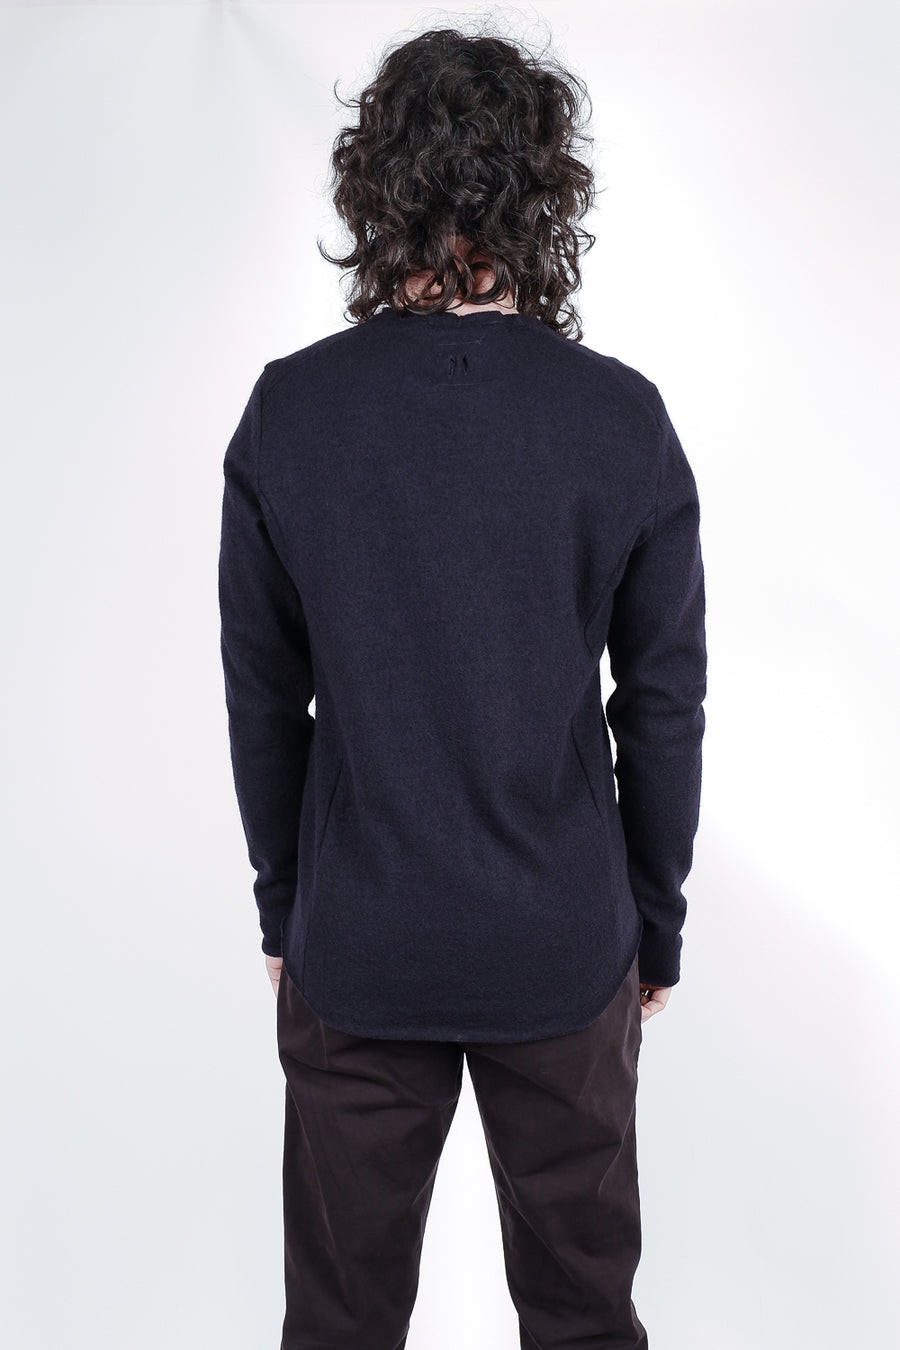 Buy the Buy the Hannes Roether Boiled Wool Sweatshirt in Navy at Intro. Spend £50 for free UK delivery. Official stockists. We ship worldwide.